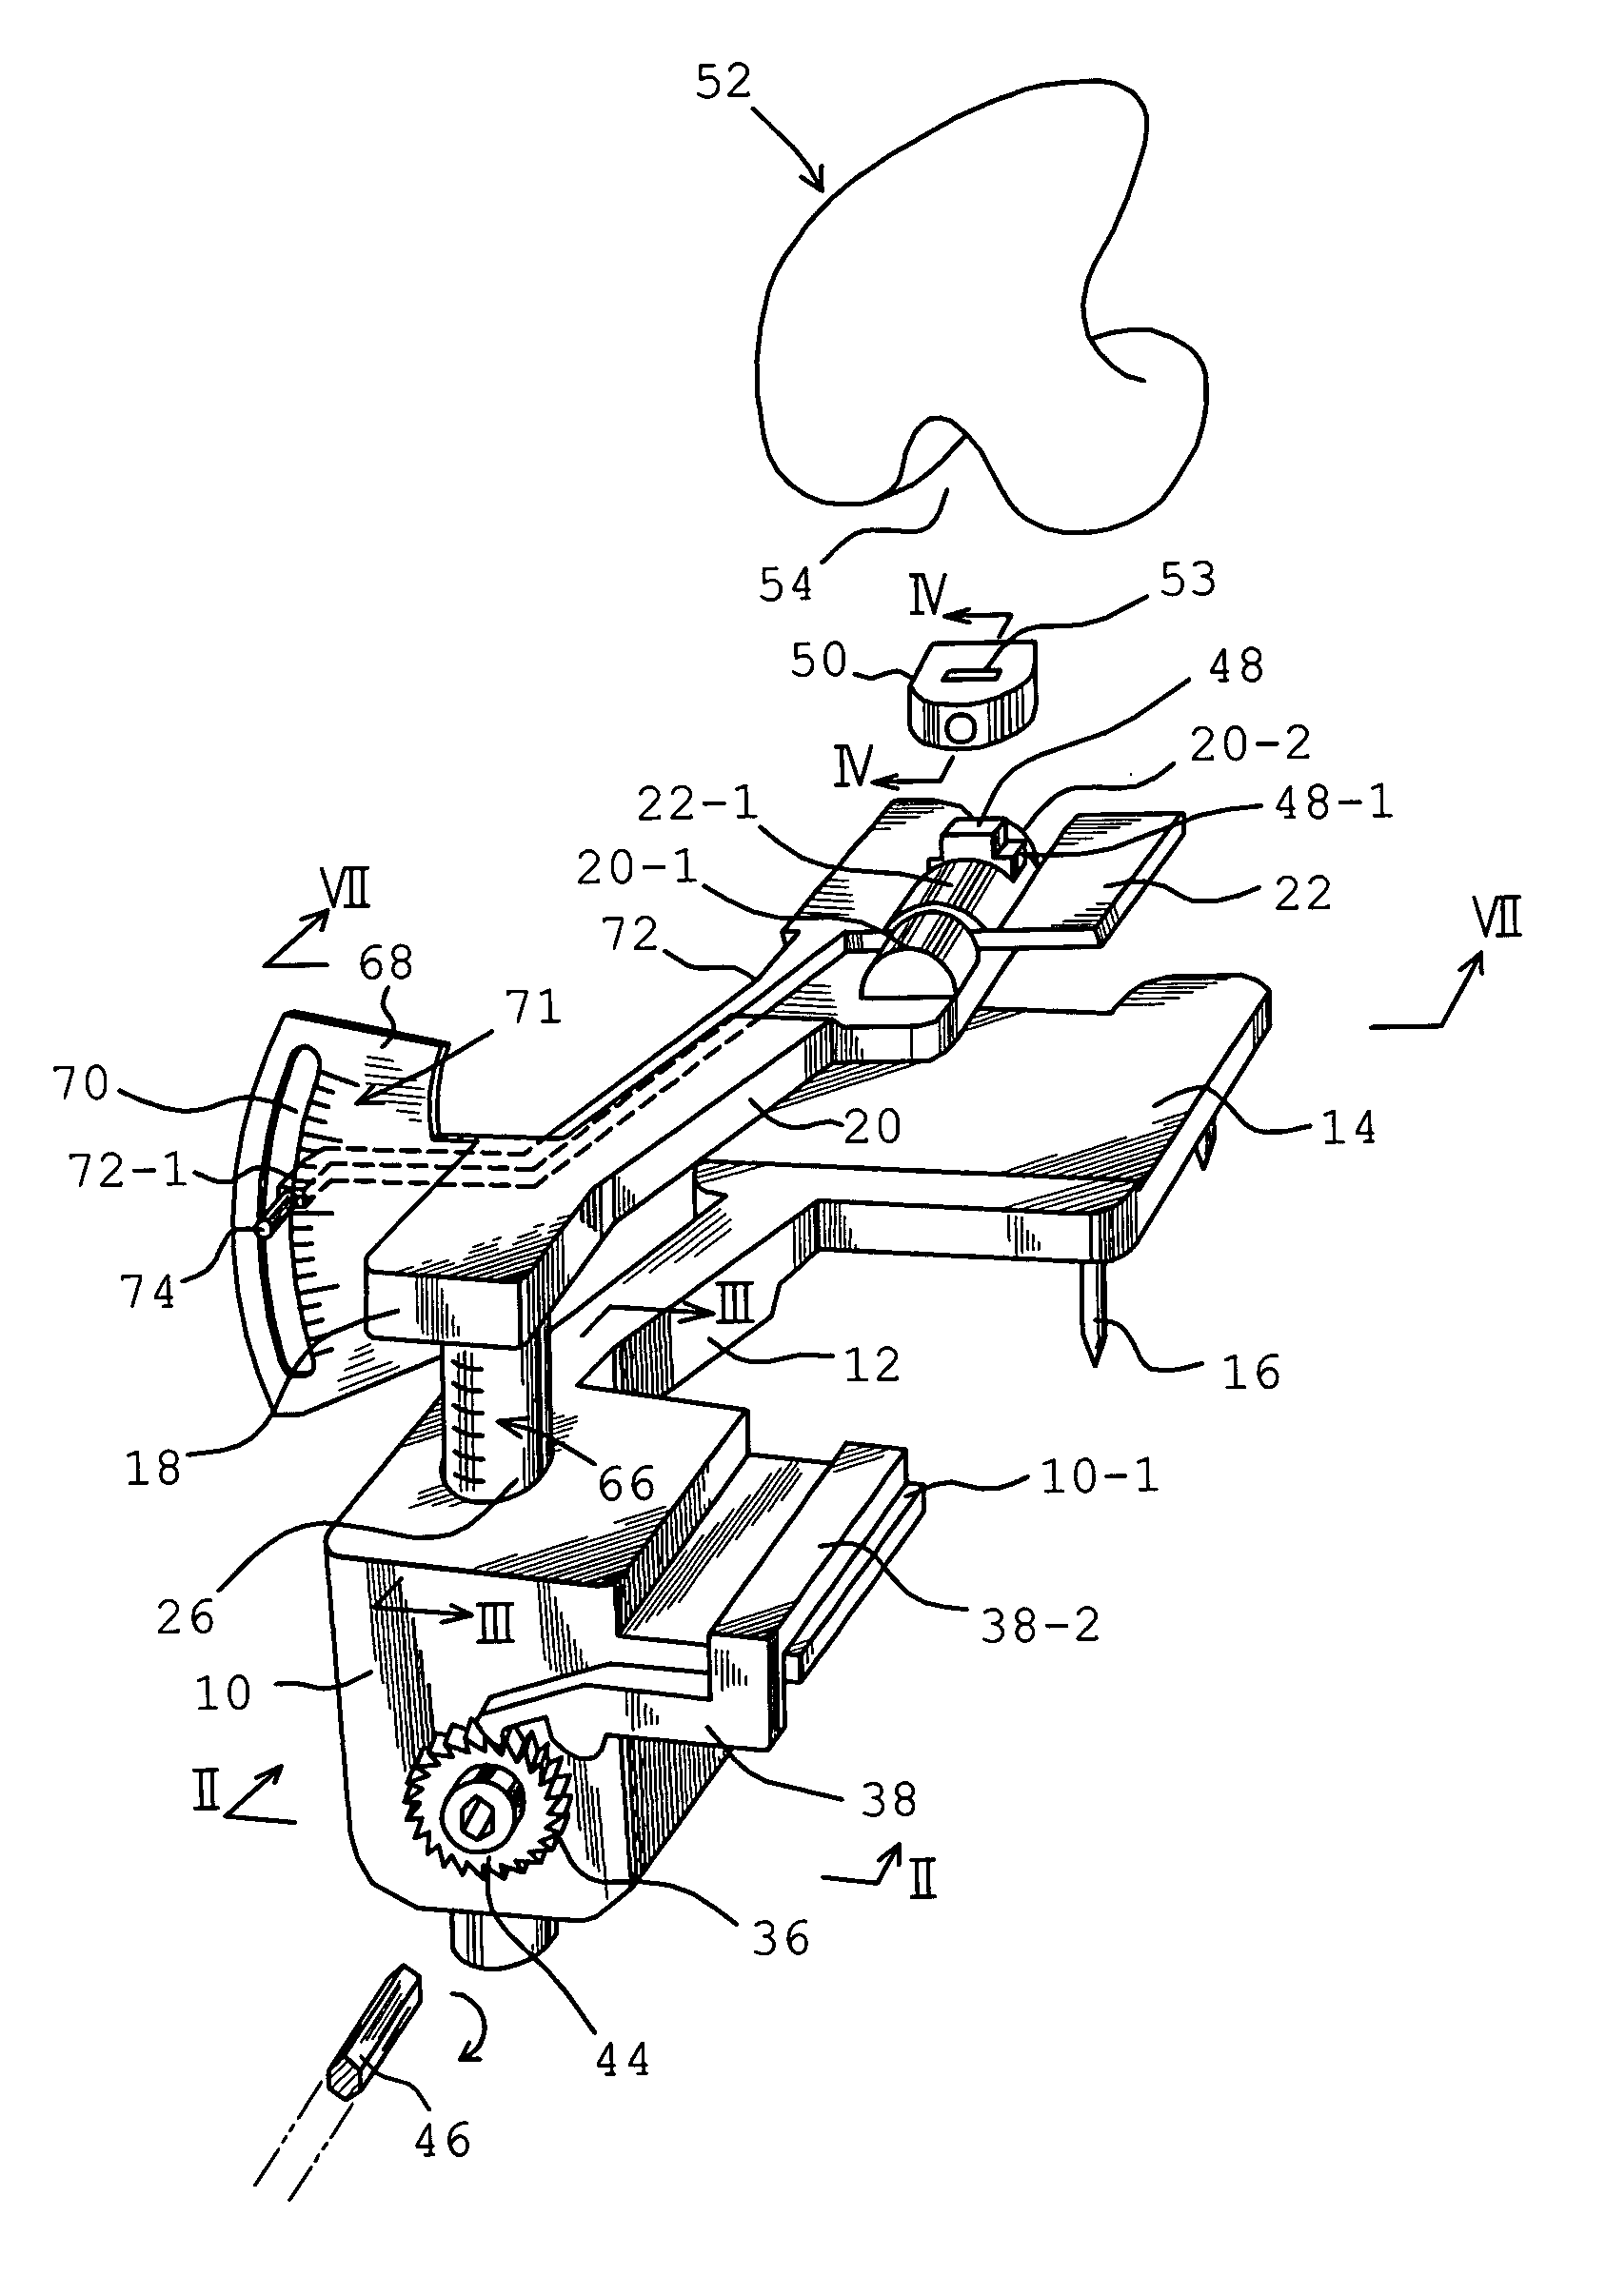 Measuring apparatus for total knee replacement operation